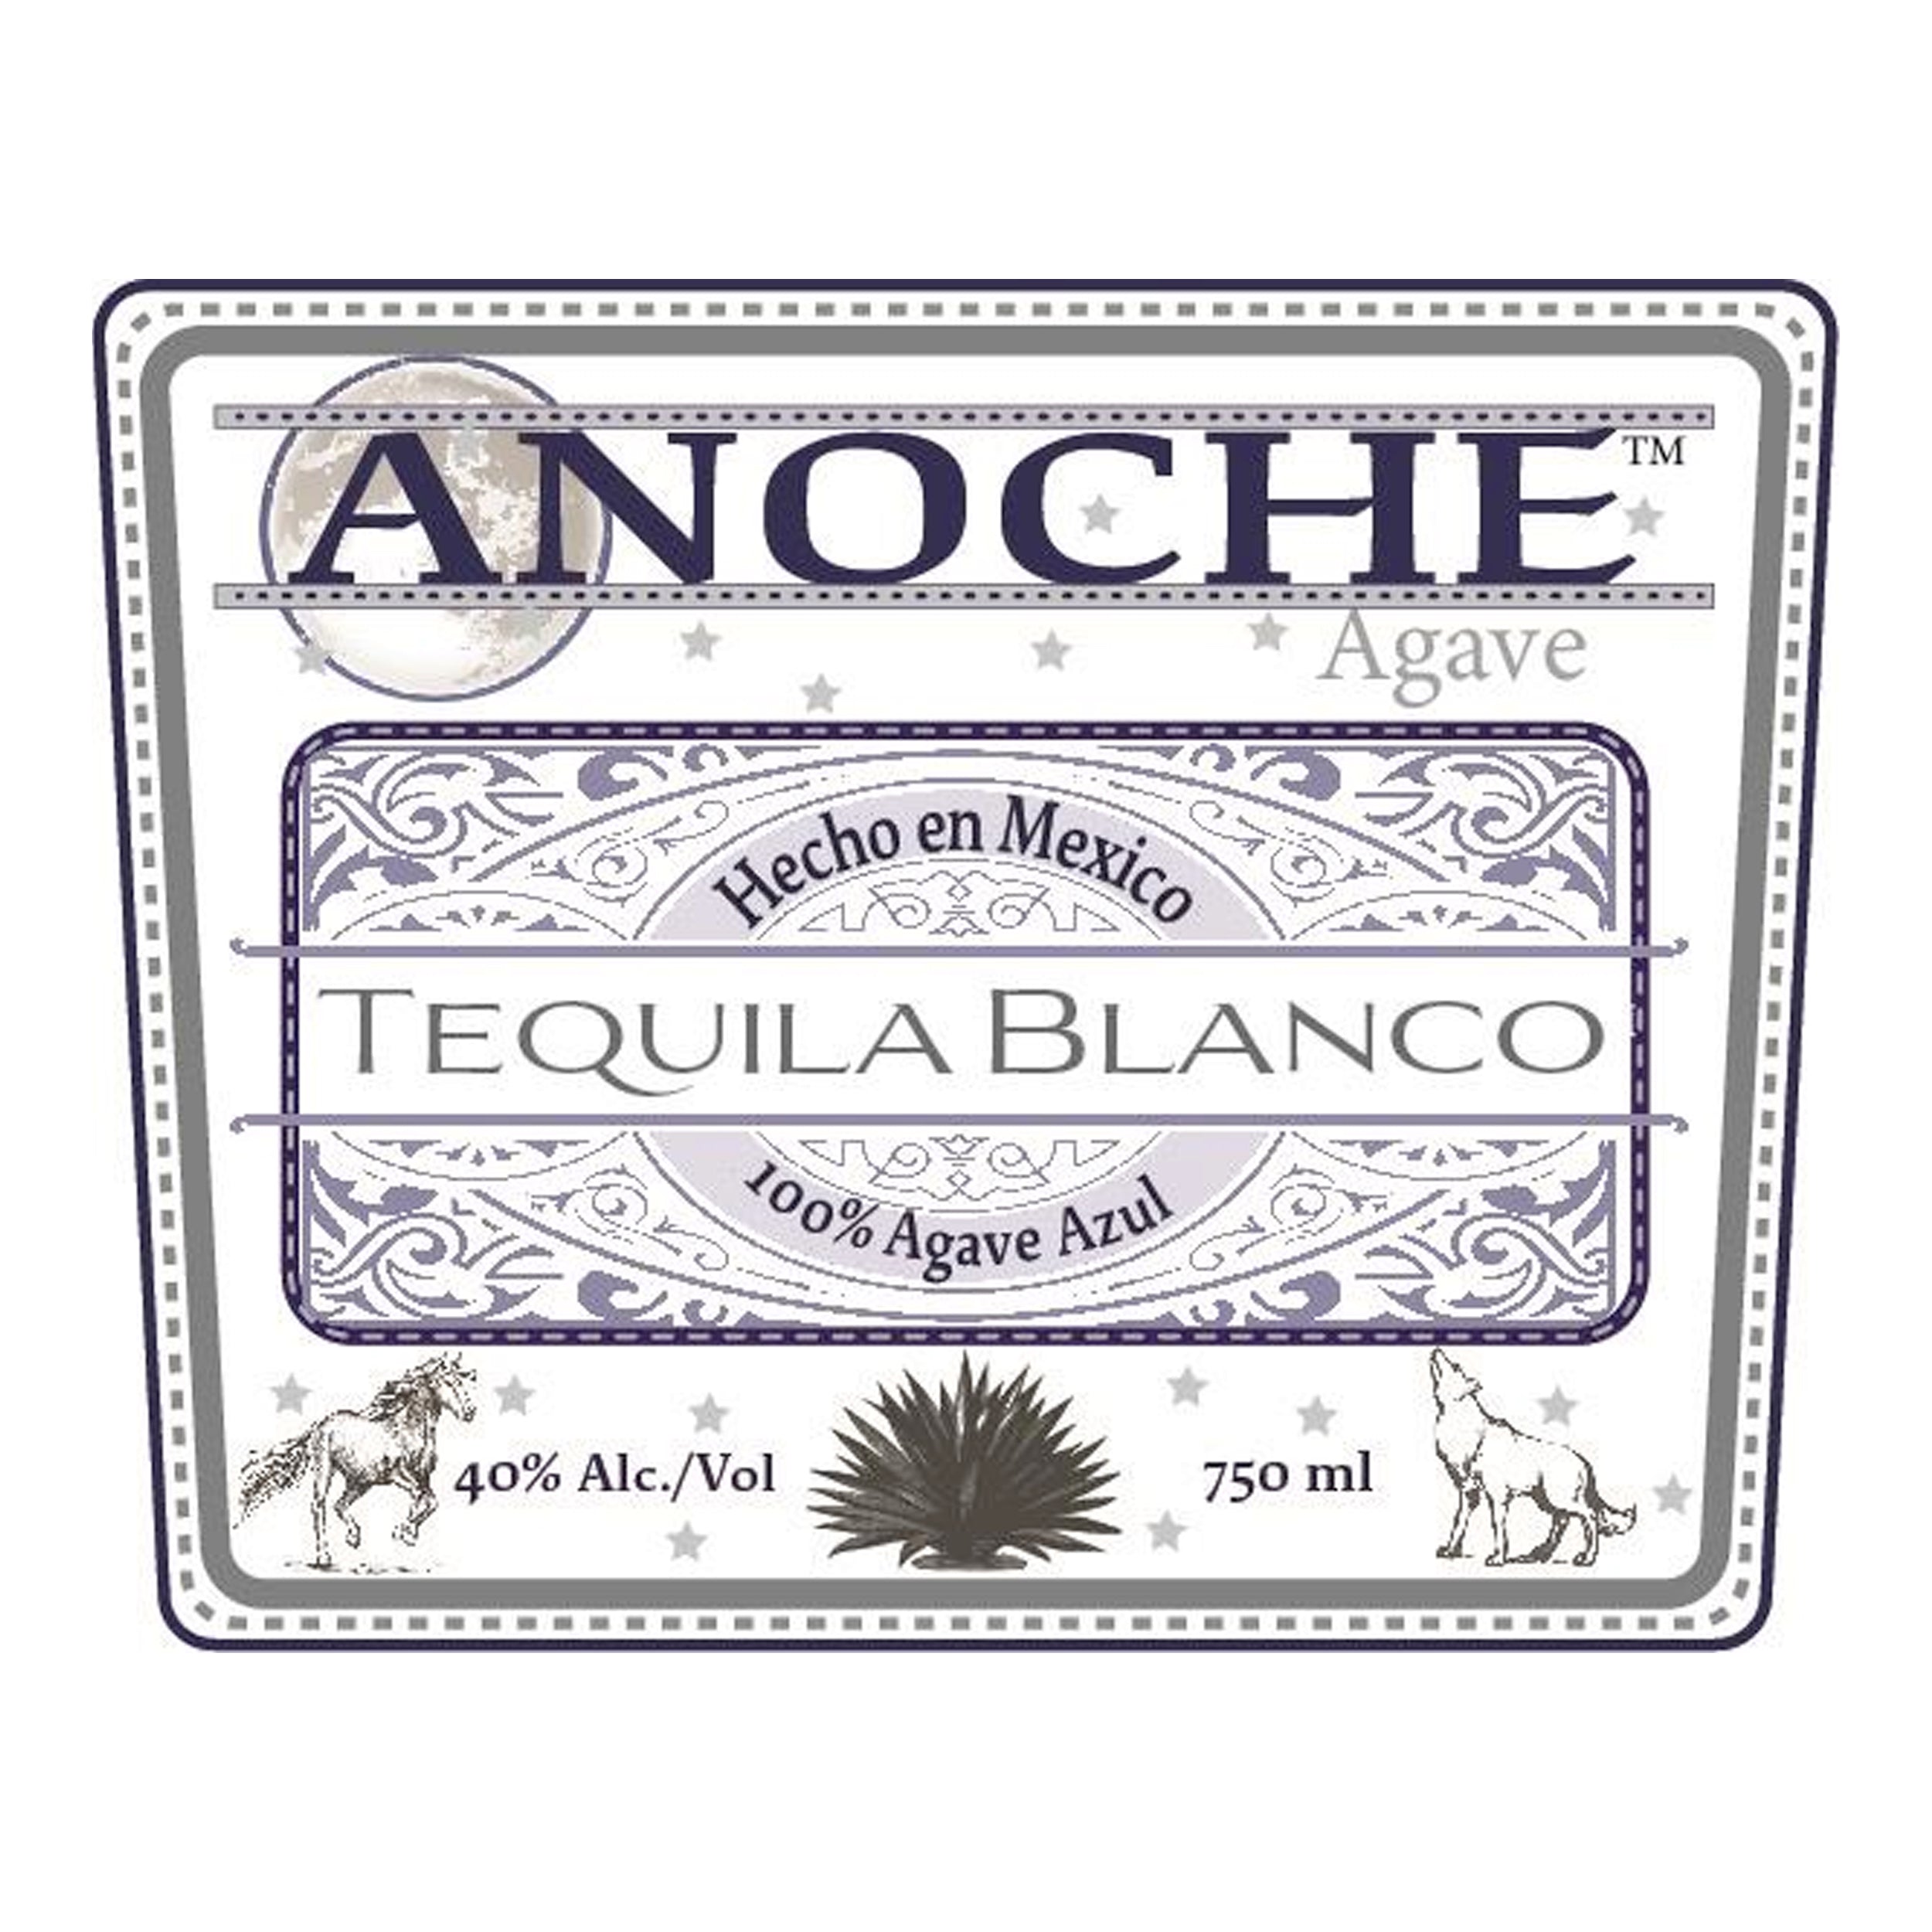 Anoche Agave Tequila Blanco